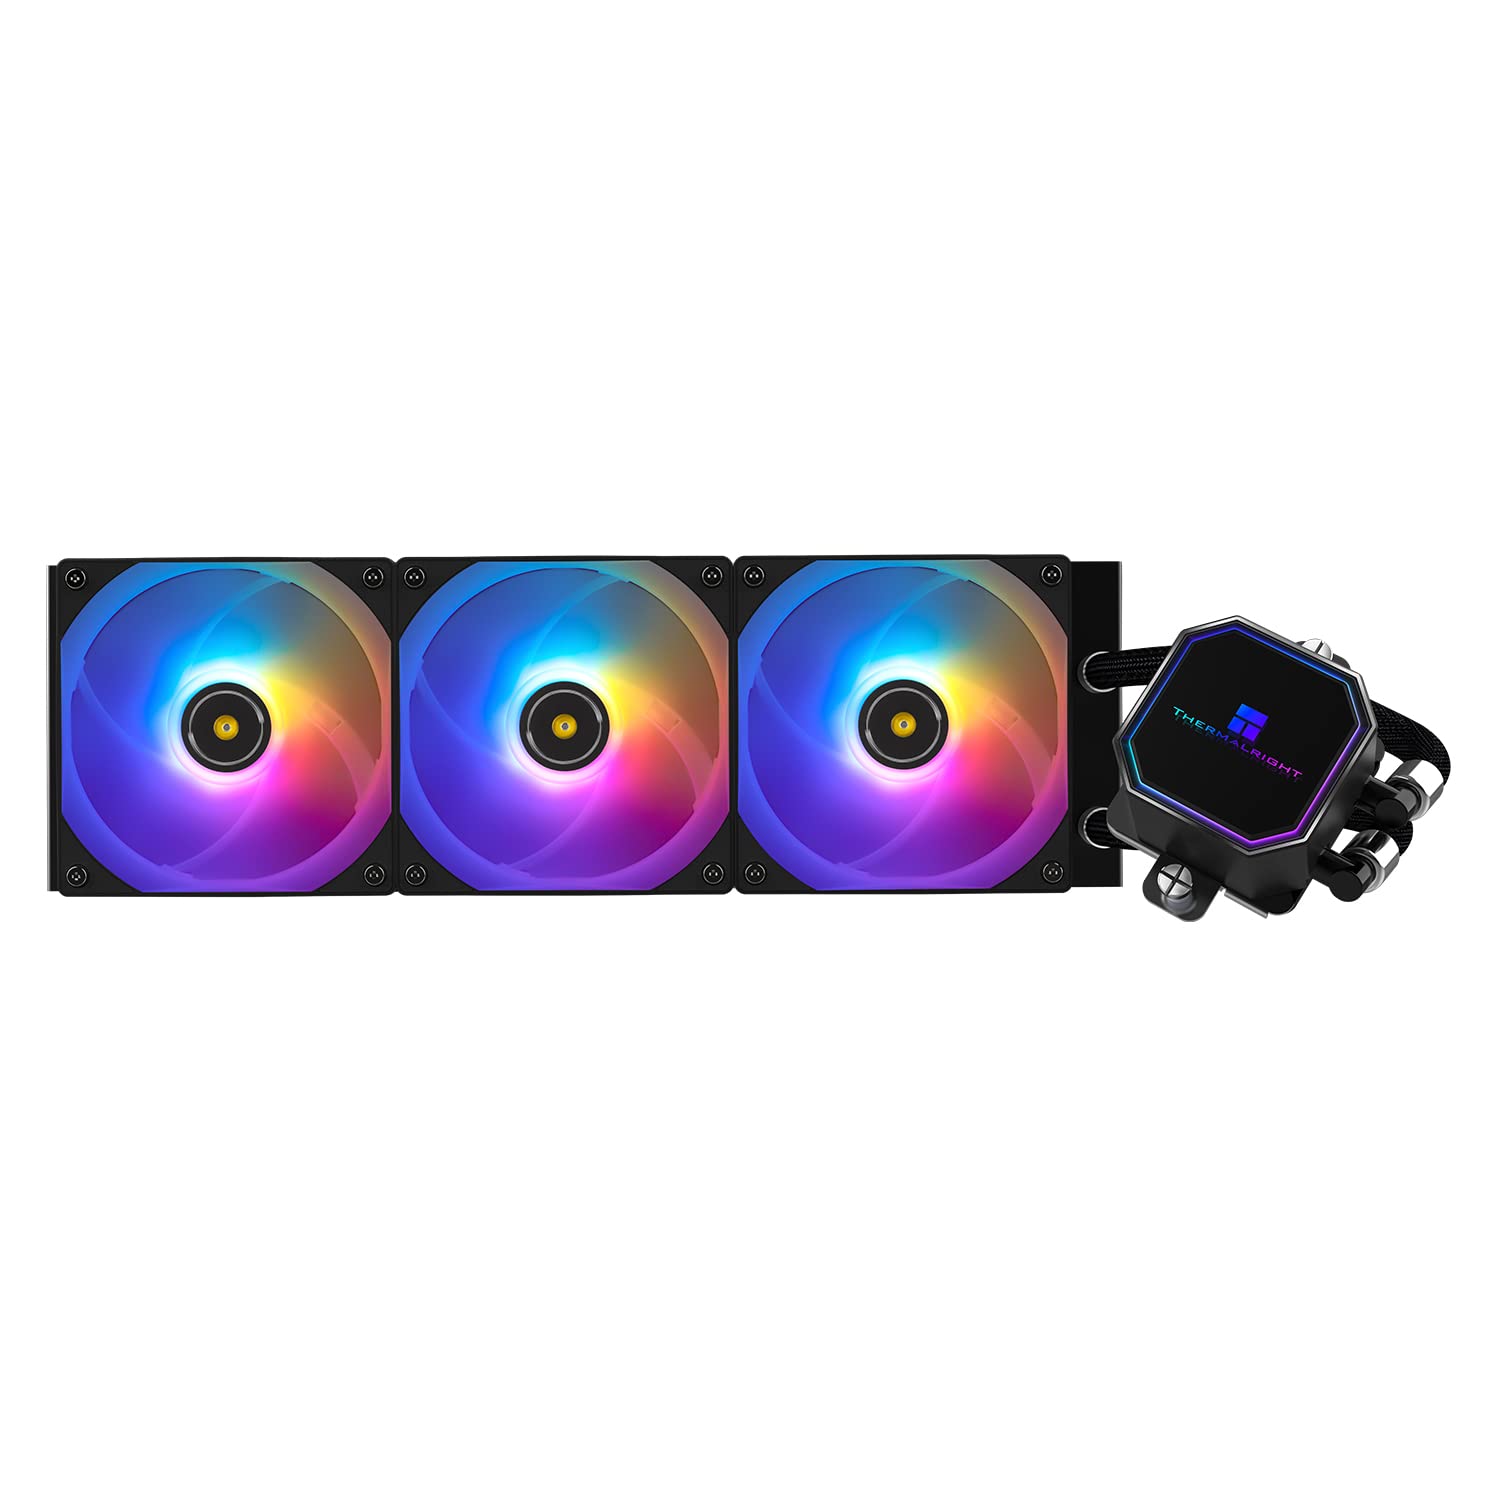 Thermalright Frozen Prism360 Black ARGB CPU Liquid Cooler,Efficient PWM Controlled Pump 3300RPM,3×TL-E12 Series PWM Fan,Water Cooling Computer Parts,for AMD AM4/AM5,Intel 1150/1151/1200/1700/2011